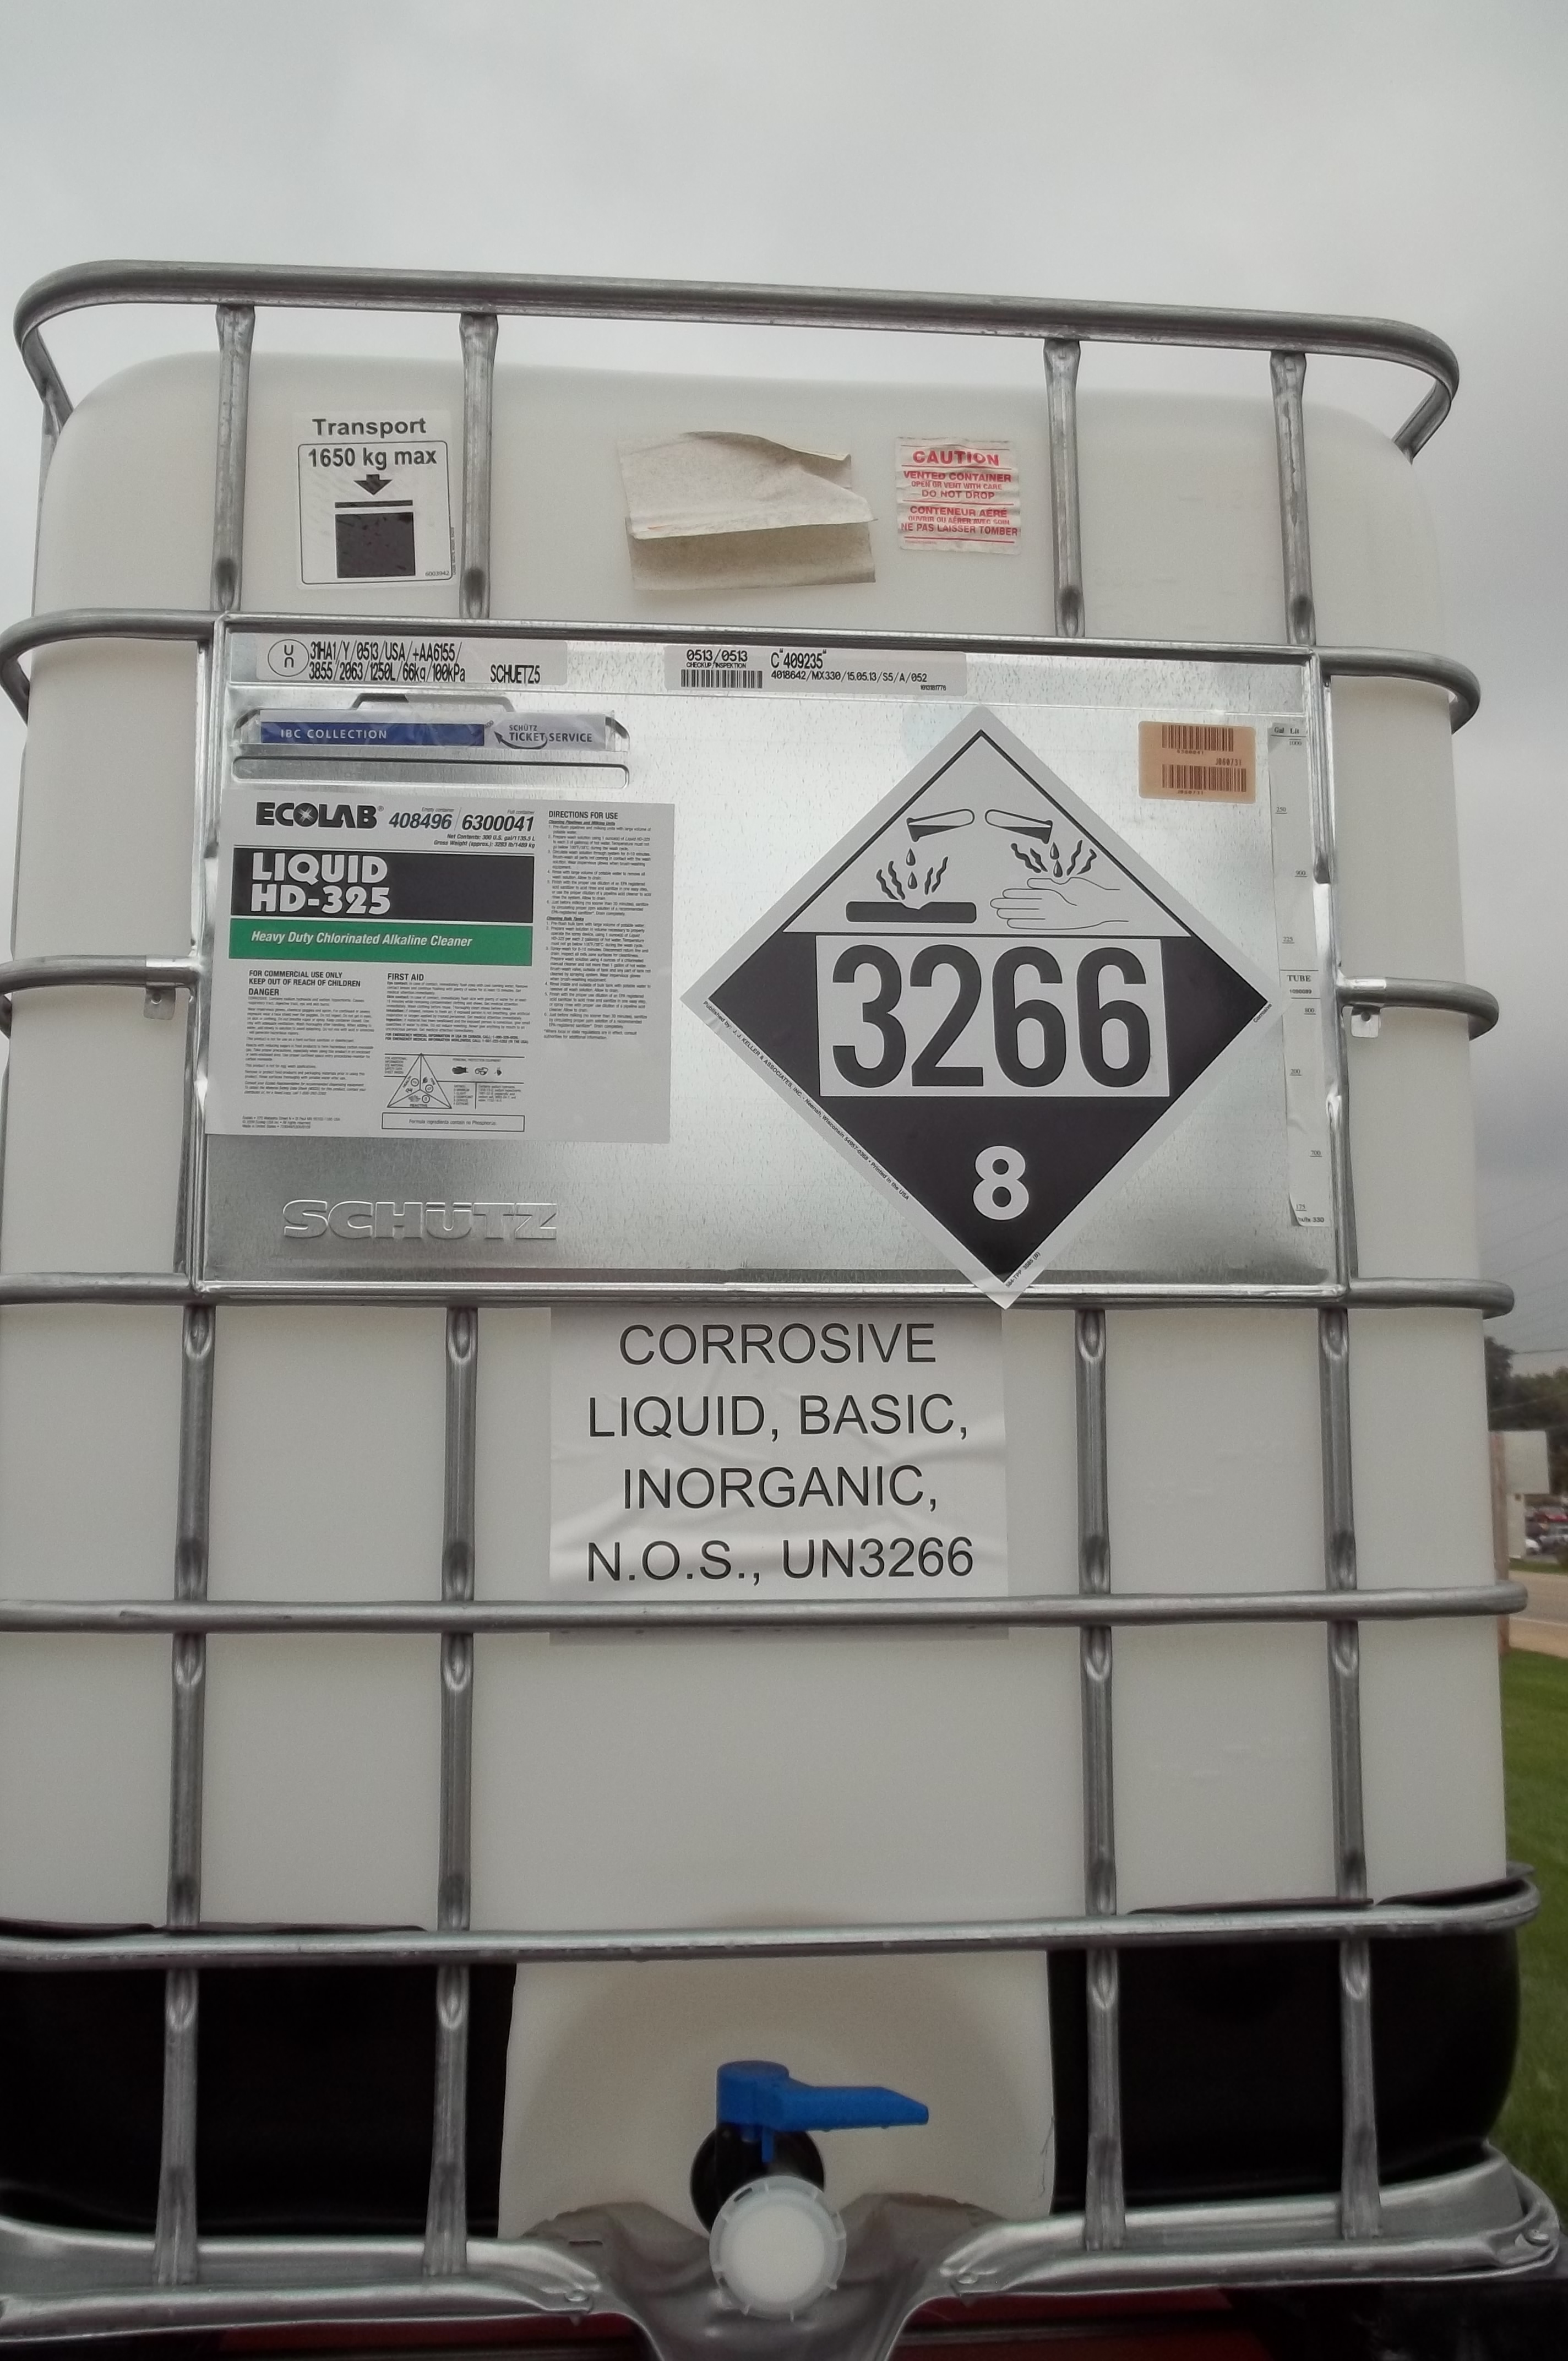 Shipping Hazardous Materials in IBC Containers: What You Need to Know by  ASC, Inc.